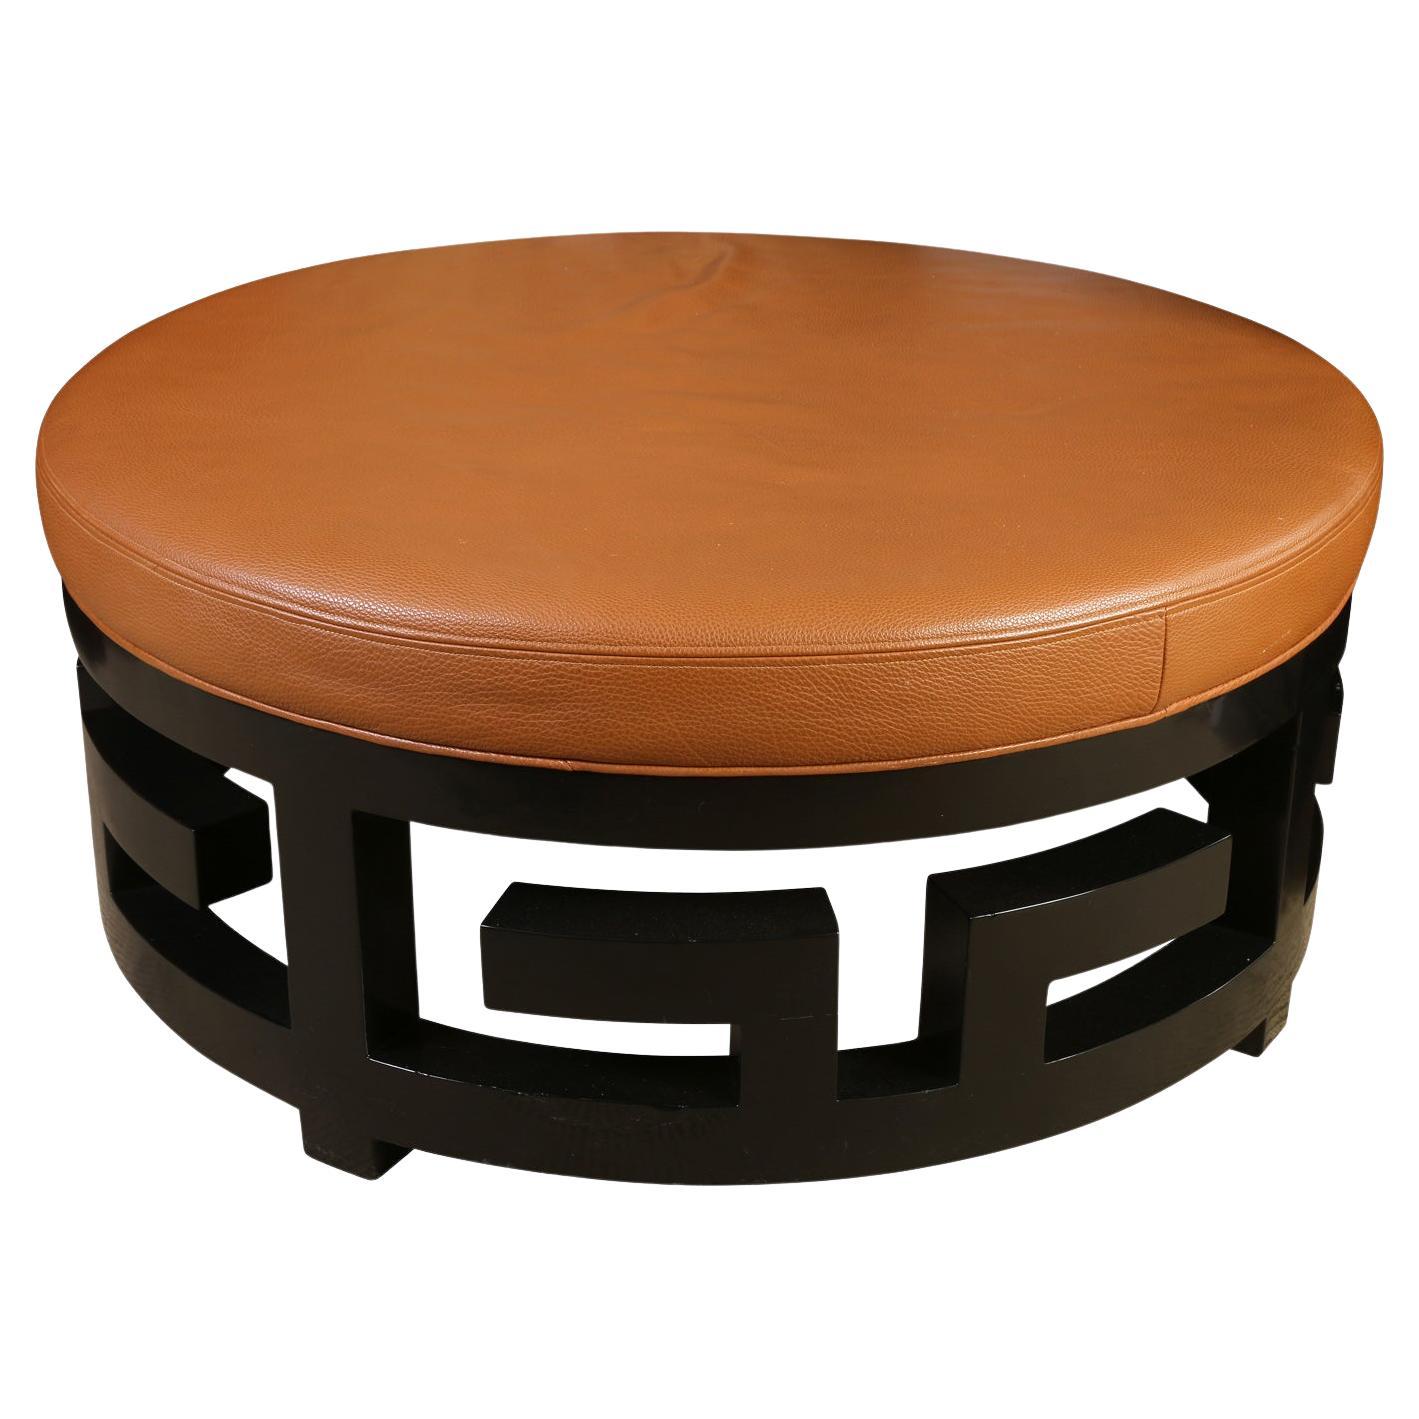 Round Pebbled Leather Ottoman with Black Fretwork Base For Sale